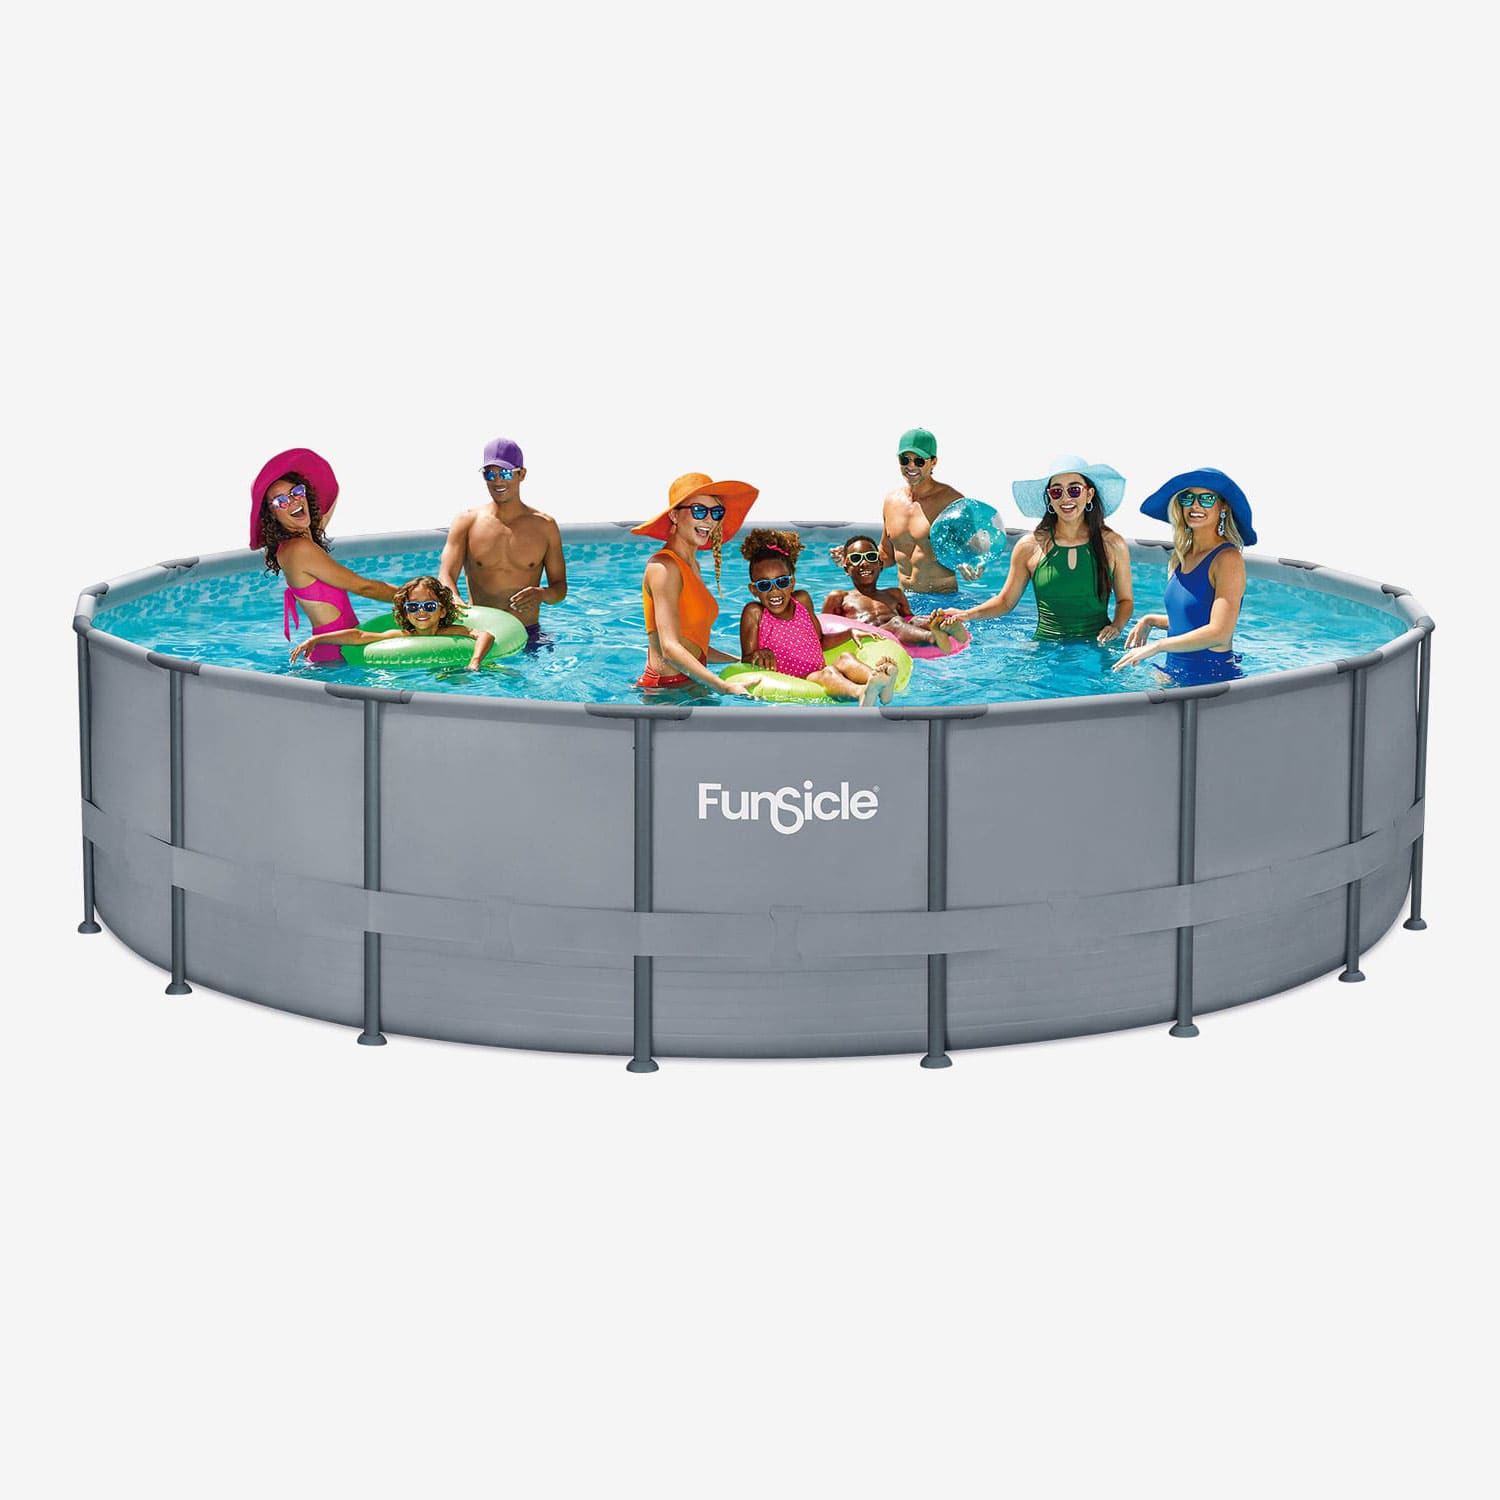 Funsicle 18 ft Oasis Pool with people